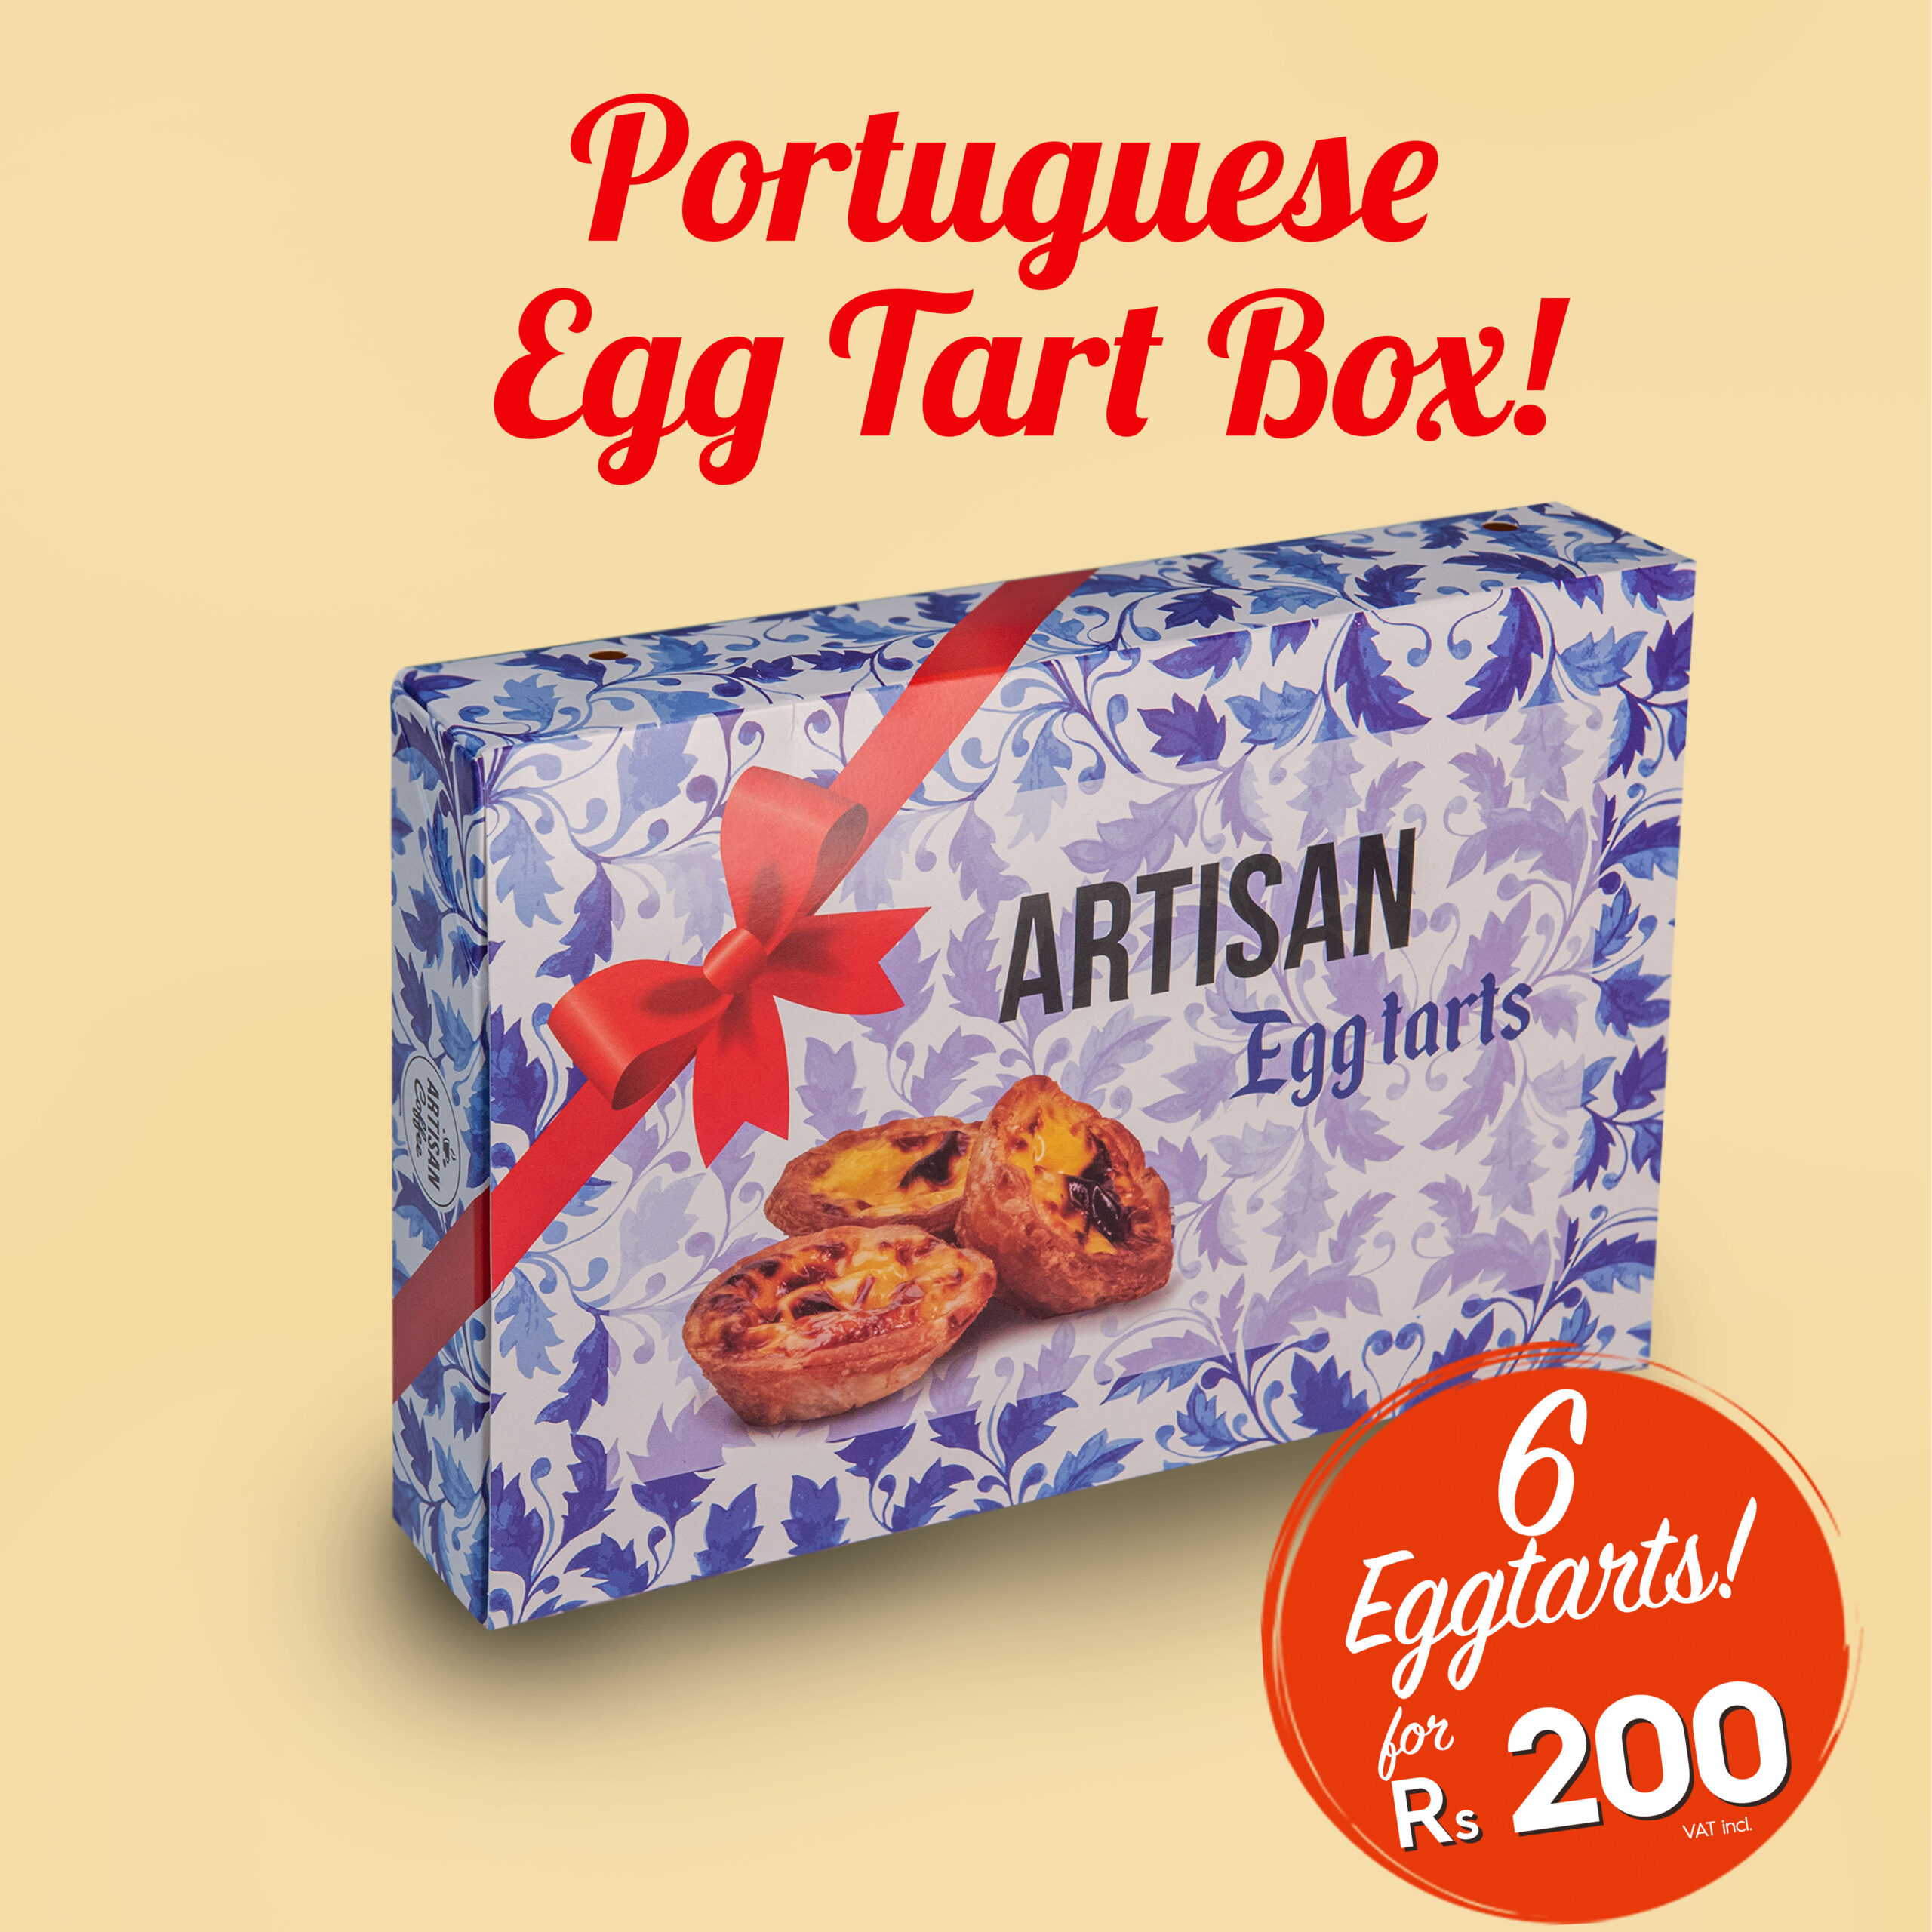 Egg tarts for Rs 200 at Artisan Coffee